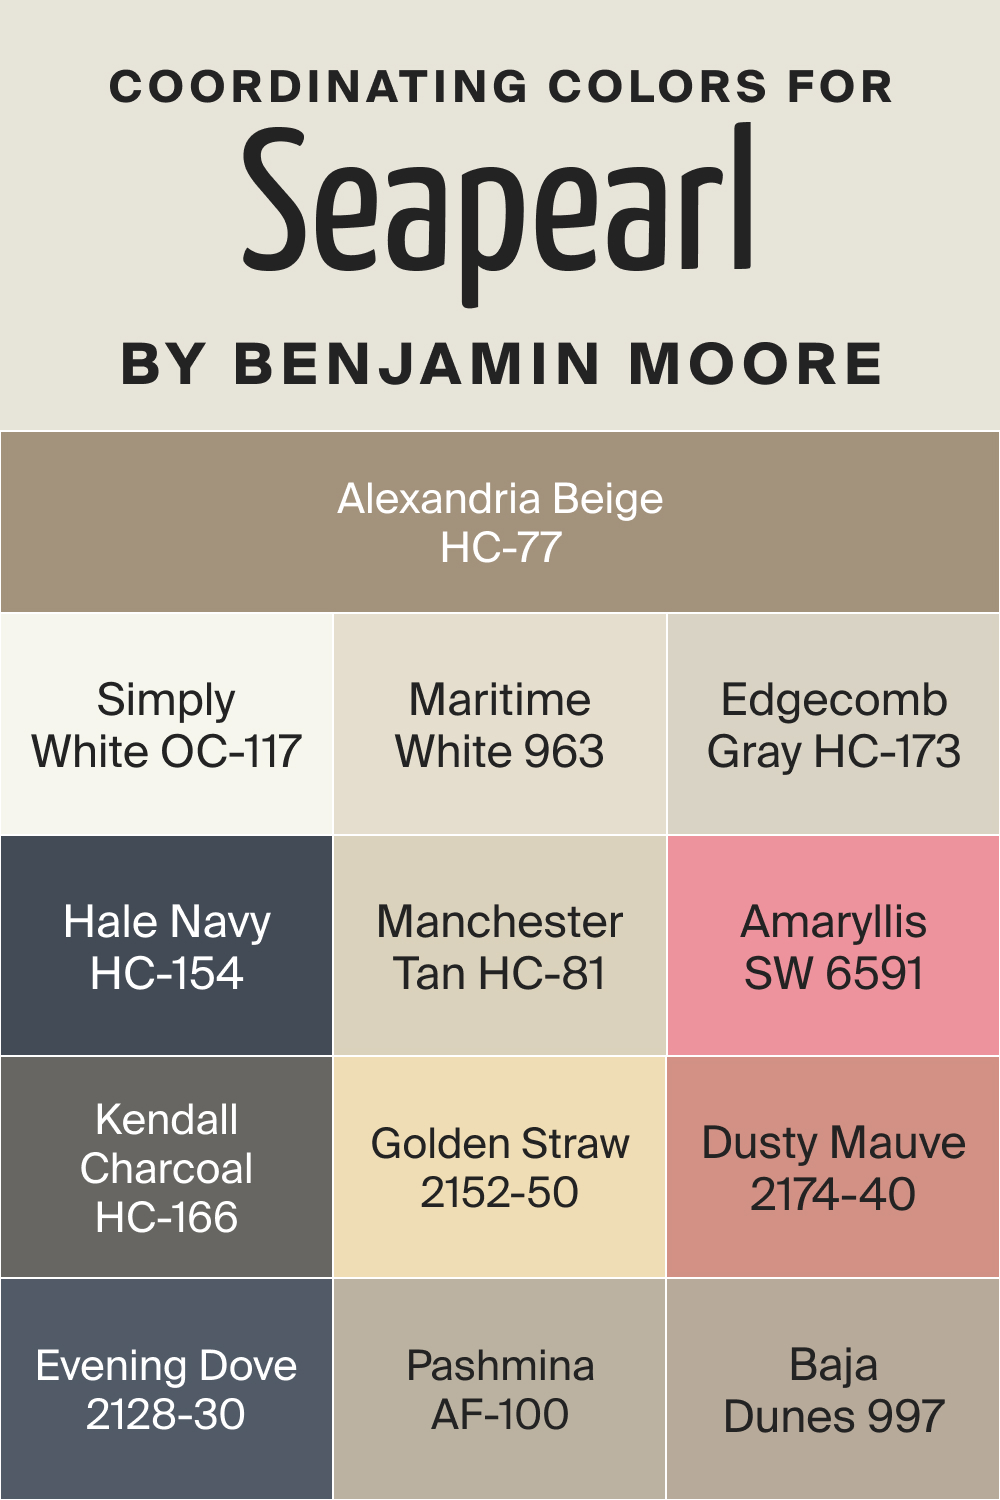 Coordinating Colors for Seapearl OC 19 by Benjamin Moore